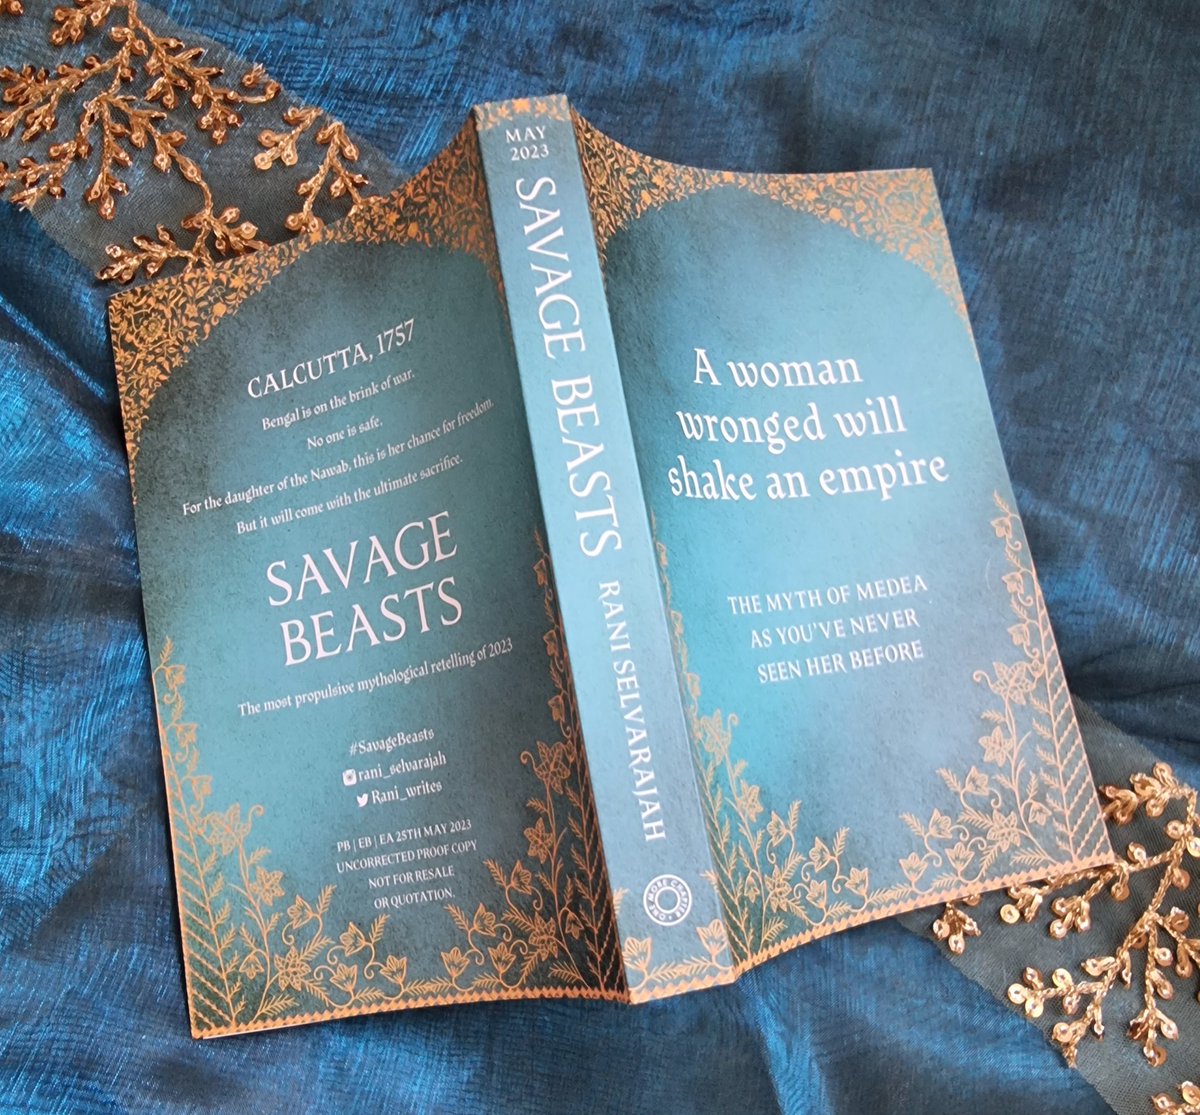 #bookpost! 
I won this gorgeous copy of #SavageBeasts in a giveaway. Thank you #onemorechapter @HarperCollinsUK 
Published 25th May
instagram.com/p/CoChMGlLoFr/…
#books #bookbloggers #BookTwitter